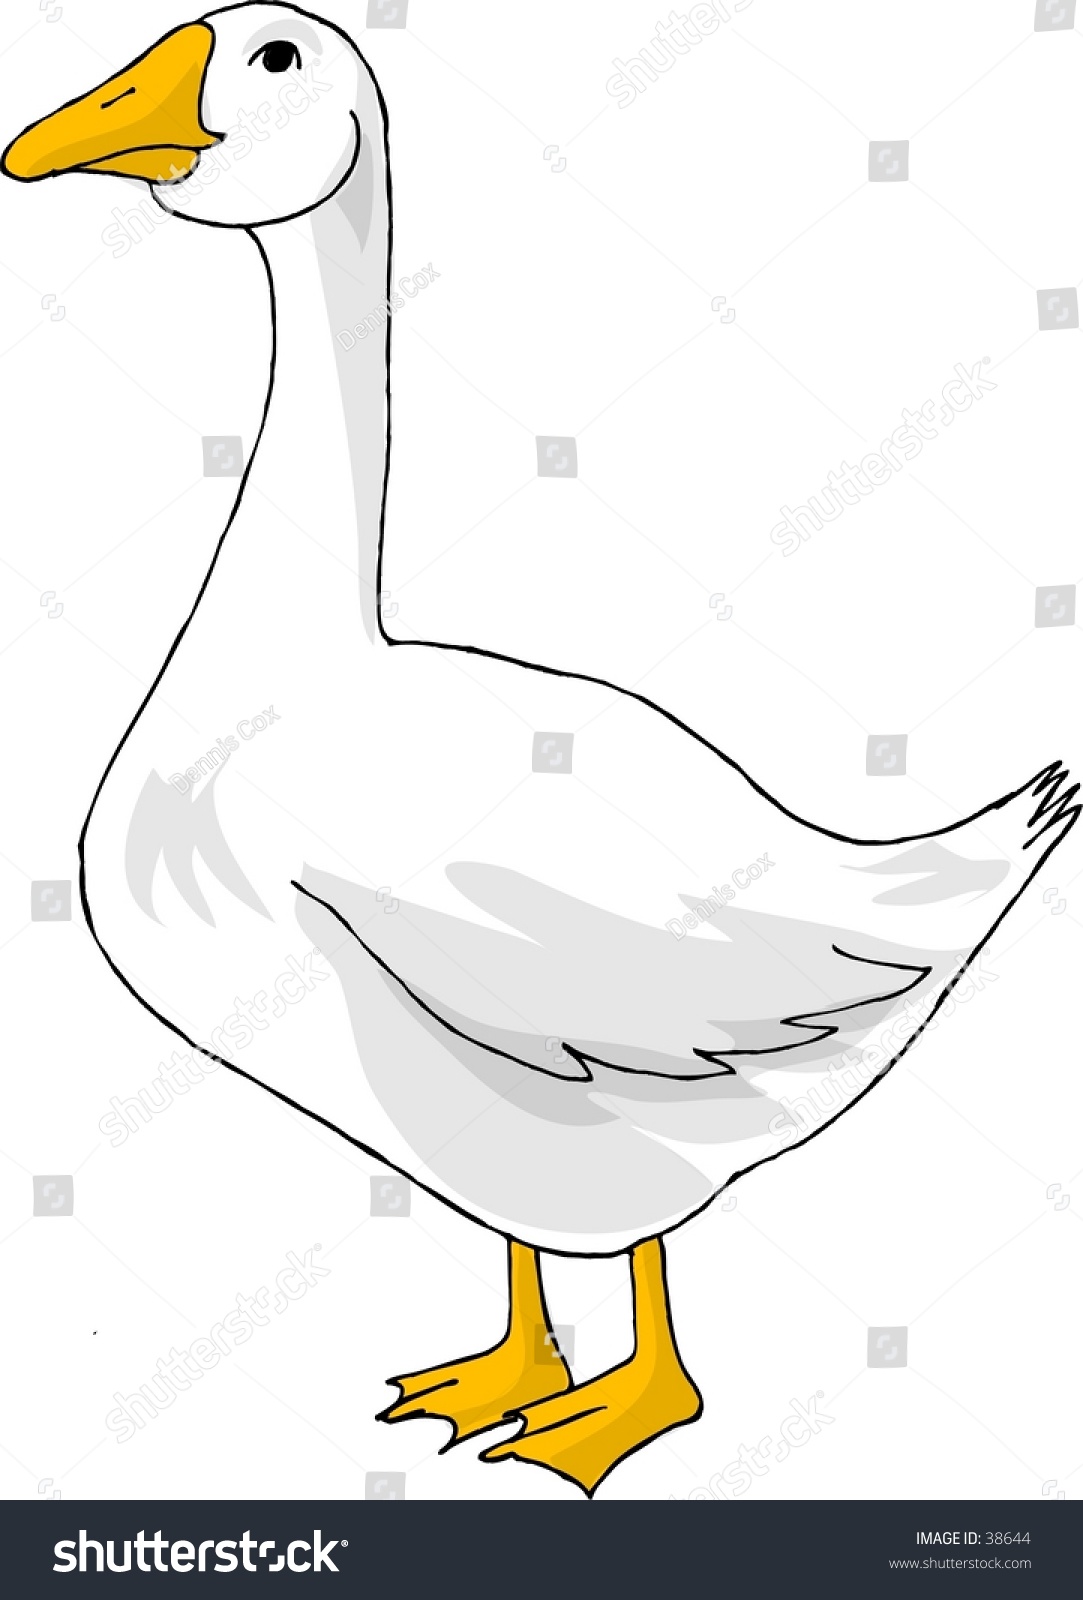 mother goose clipart images - photo #45